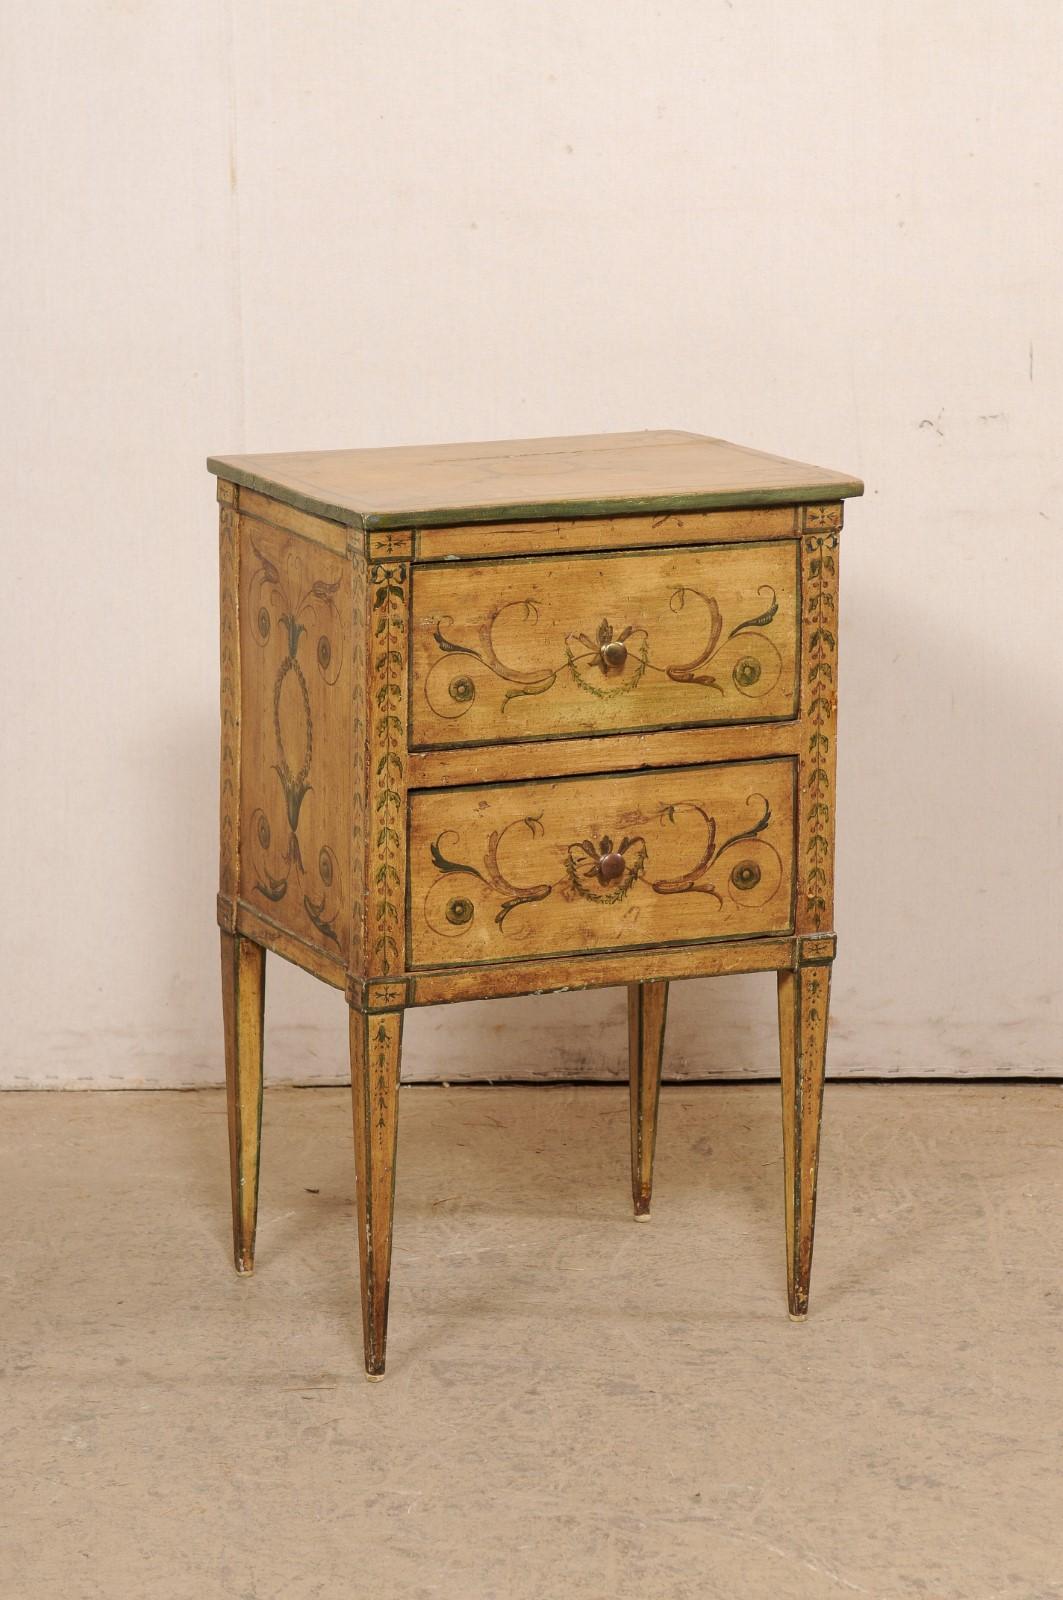 An Italian raised two-drawer painted wood side chest from the 19th century. This antique petite sized chest from Italy is comprised of clean/straight lines, which has been nicely complimented with beautiful hand-painted foliate of wispy leaves and